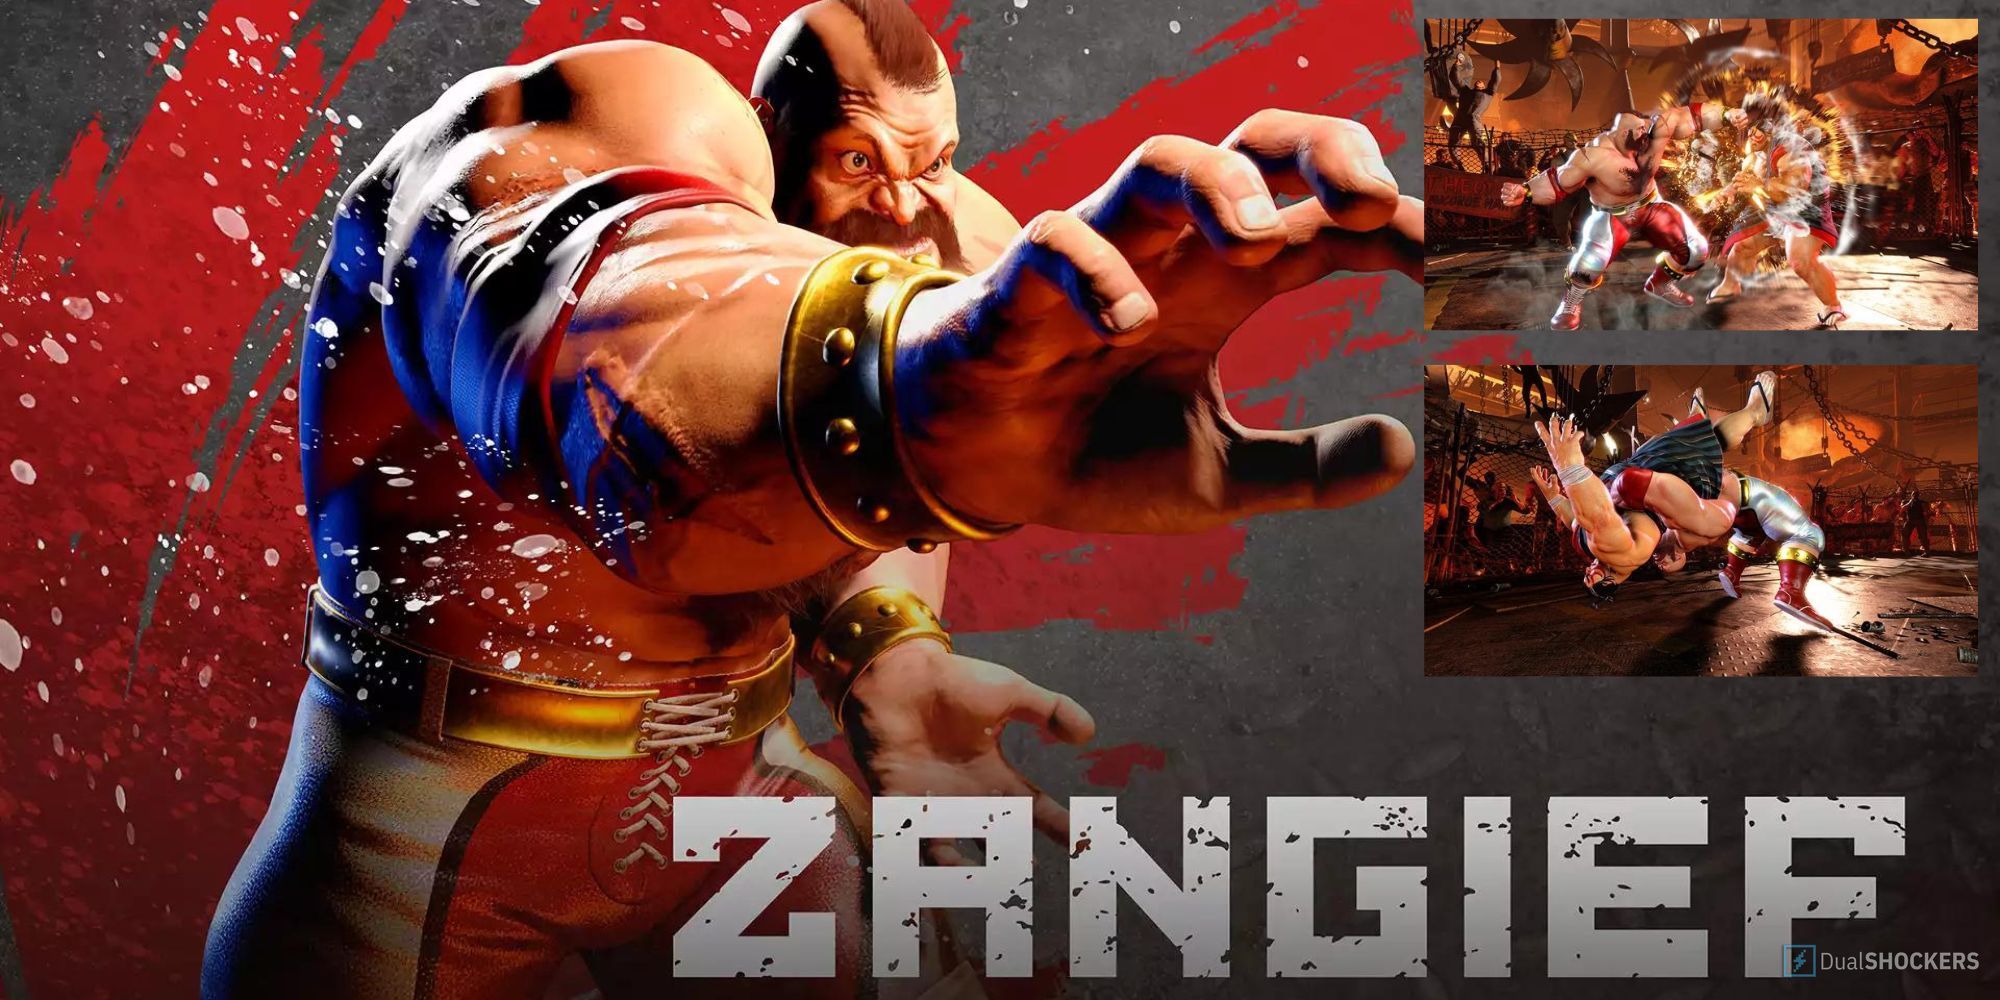 Zangief Ultra Street Fighter 4 moves list, strategy guide, combos